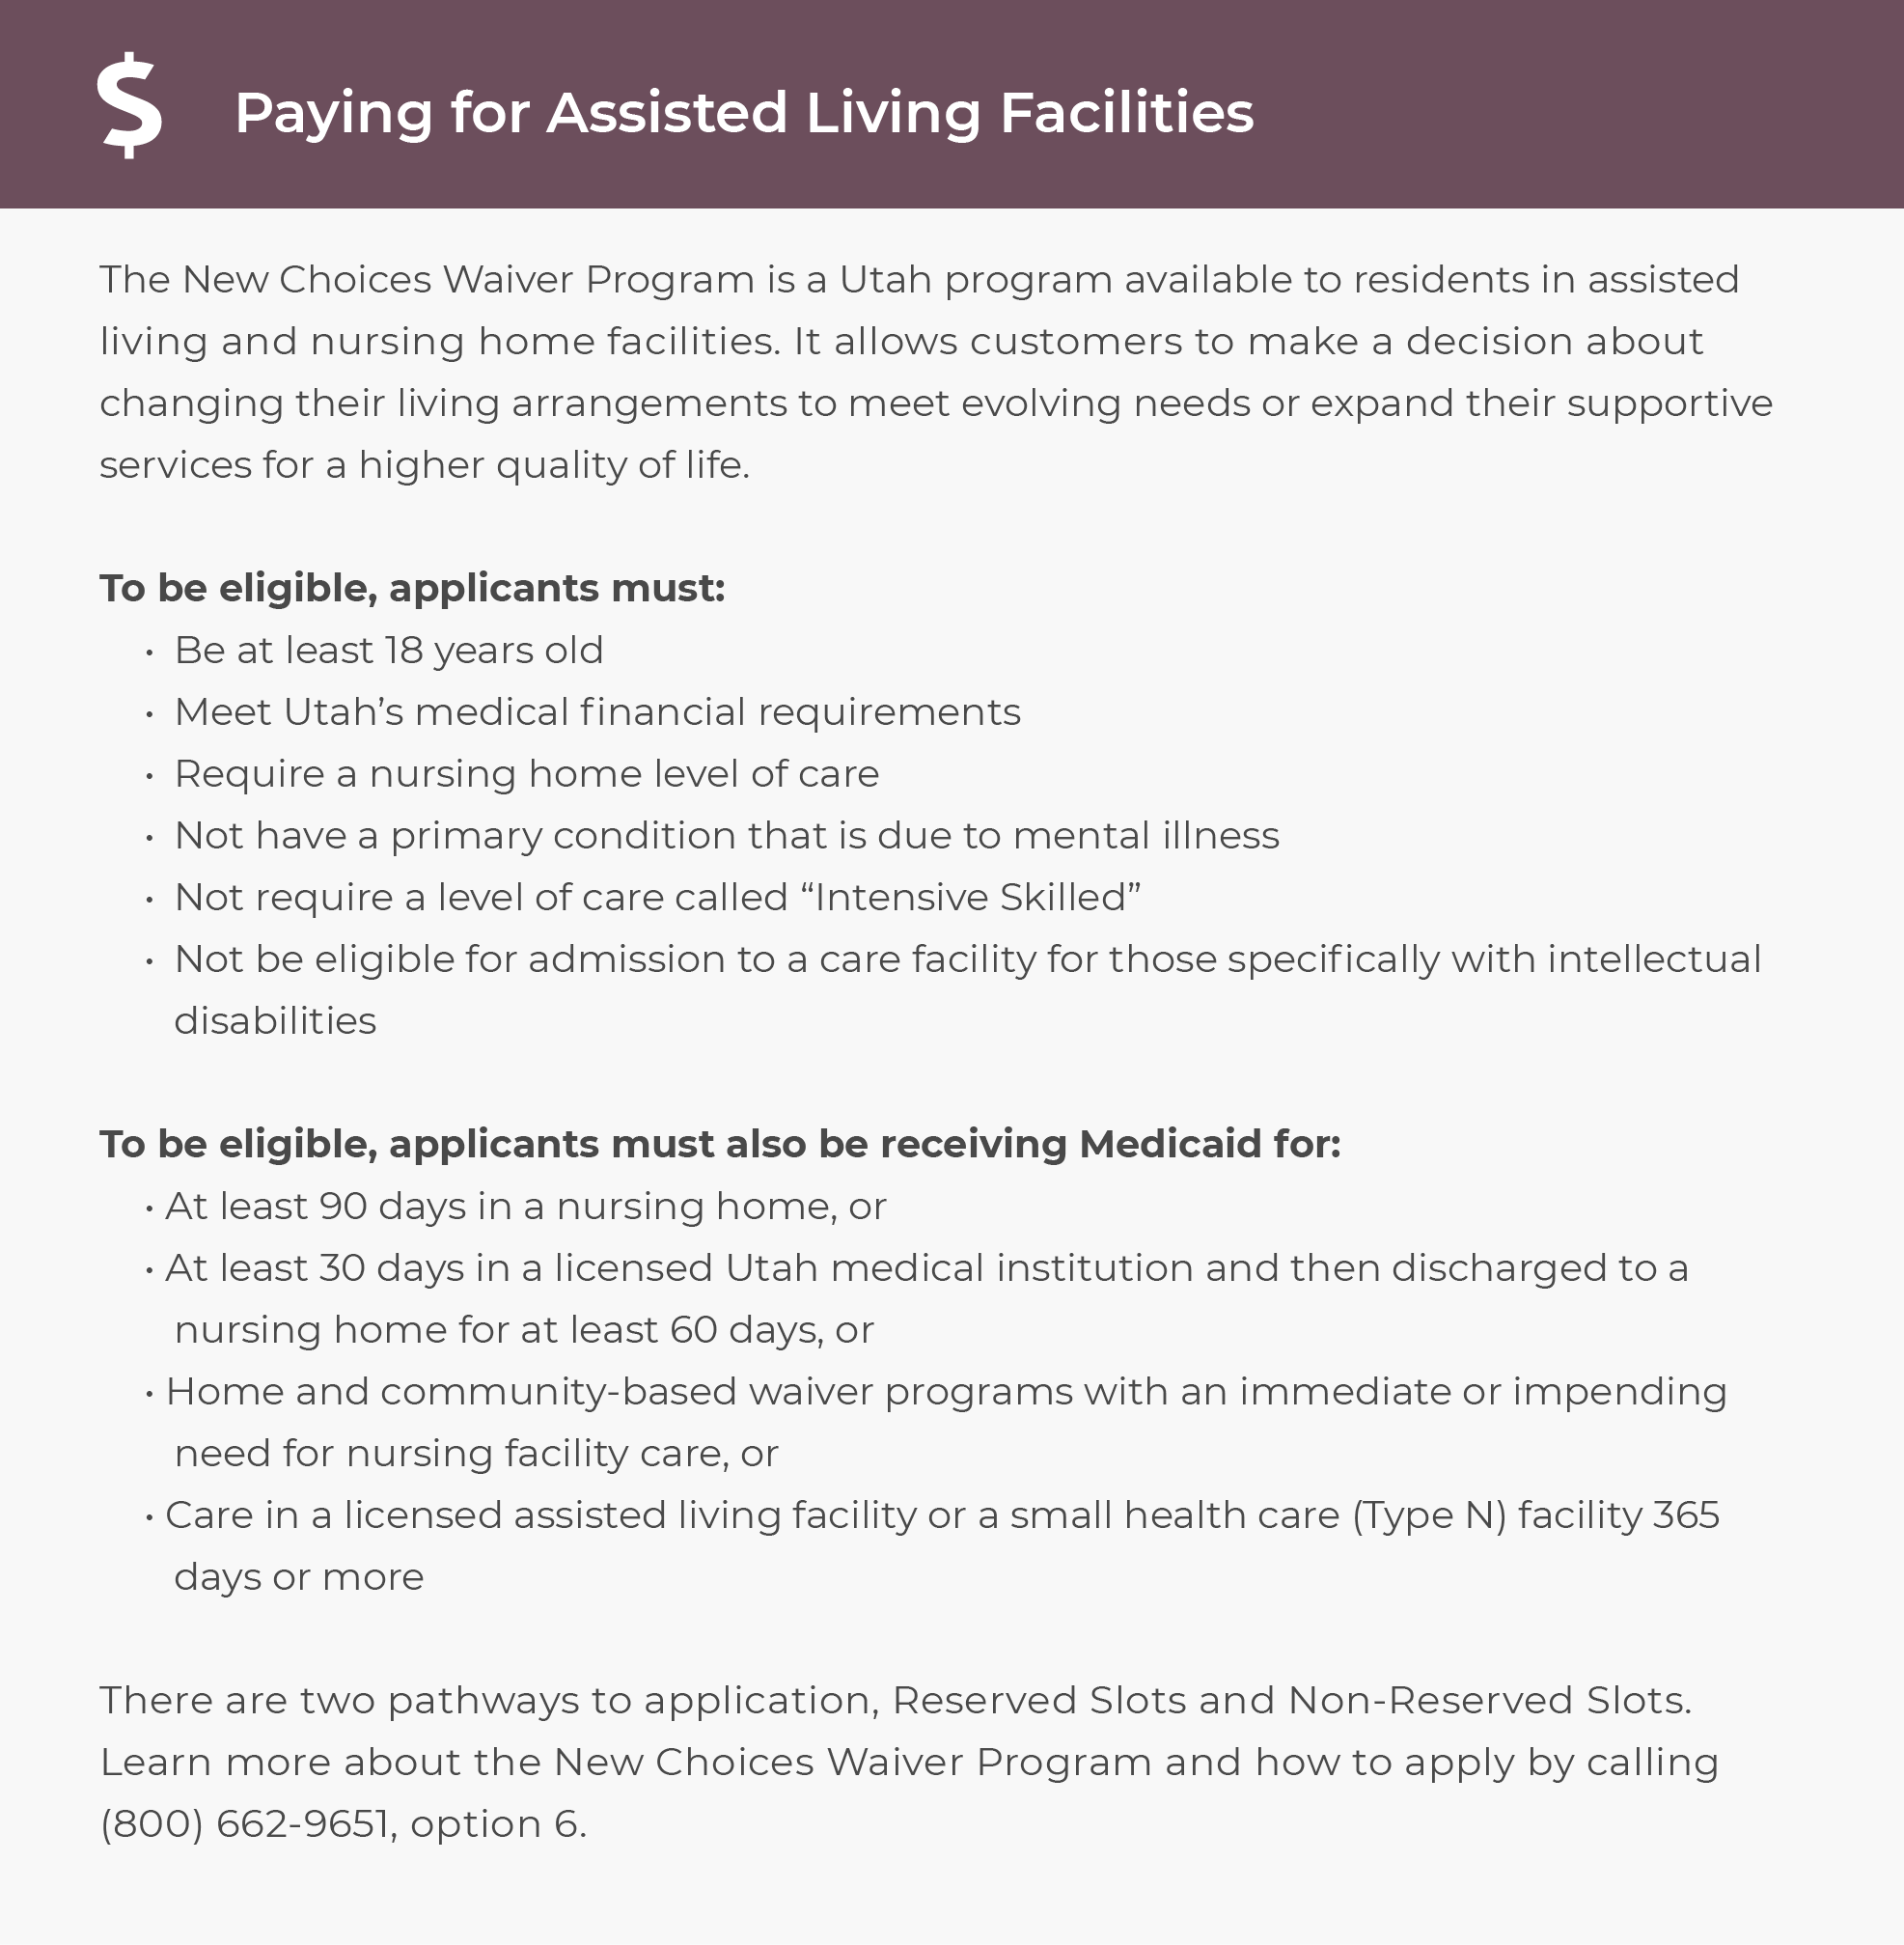 Paying for assisted living in Utah